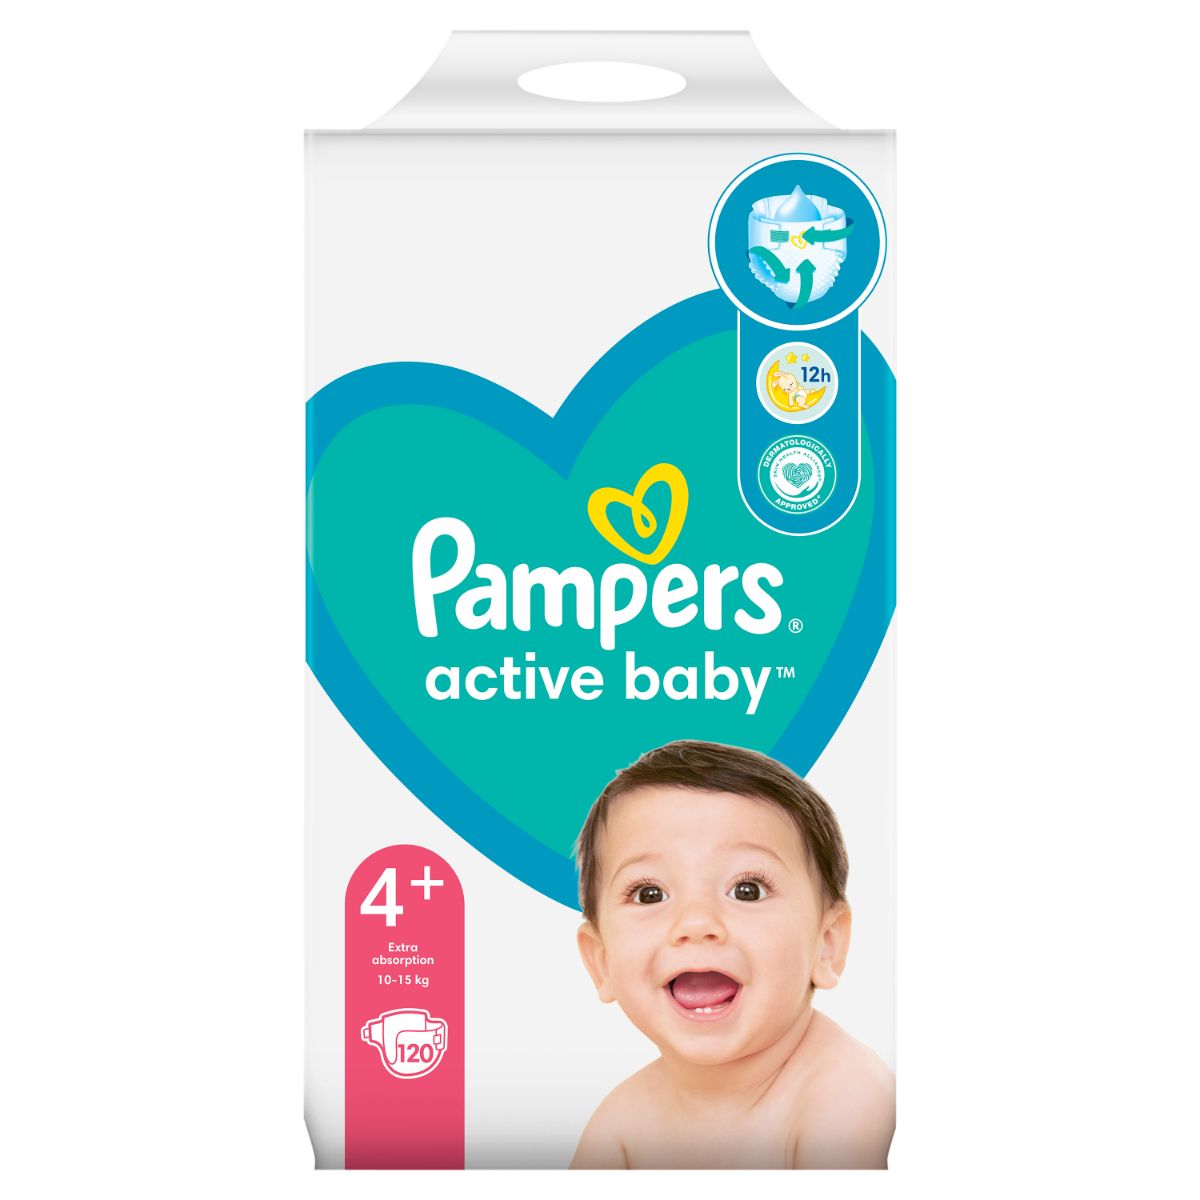 Scutece Pampers 4+ Act Baby, 10-15 kg, 120 buc 10-15 imagine 2022 protejamcopilaria.ro